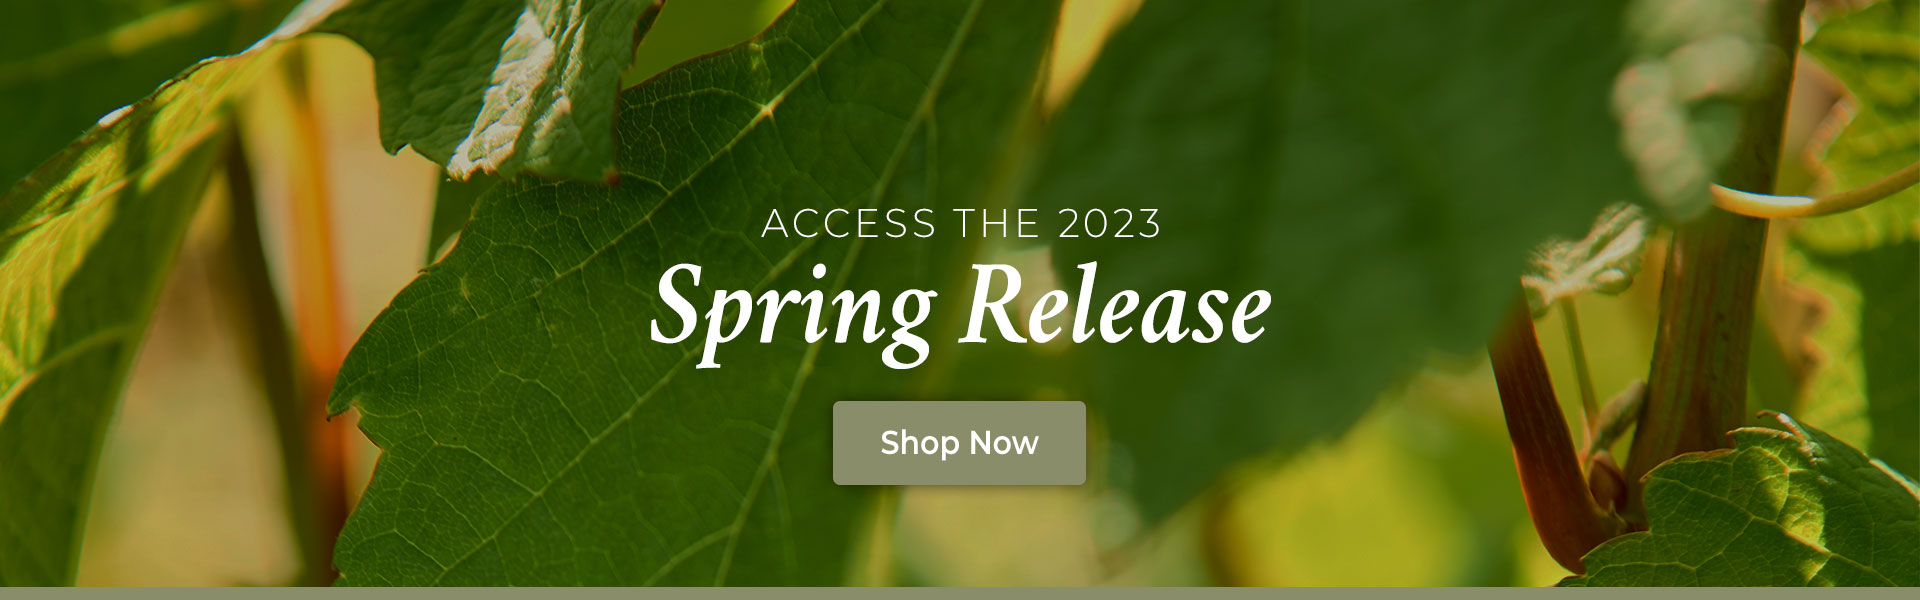 The Spring Release 2023